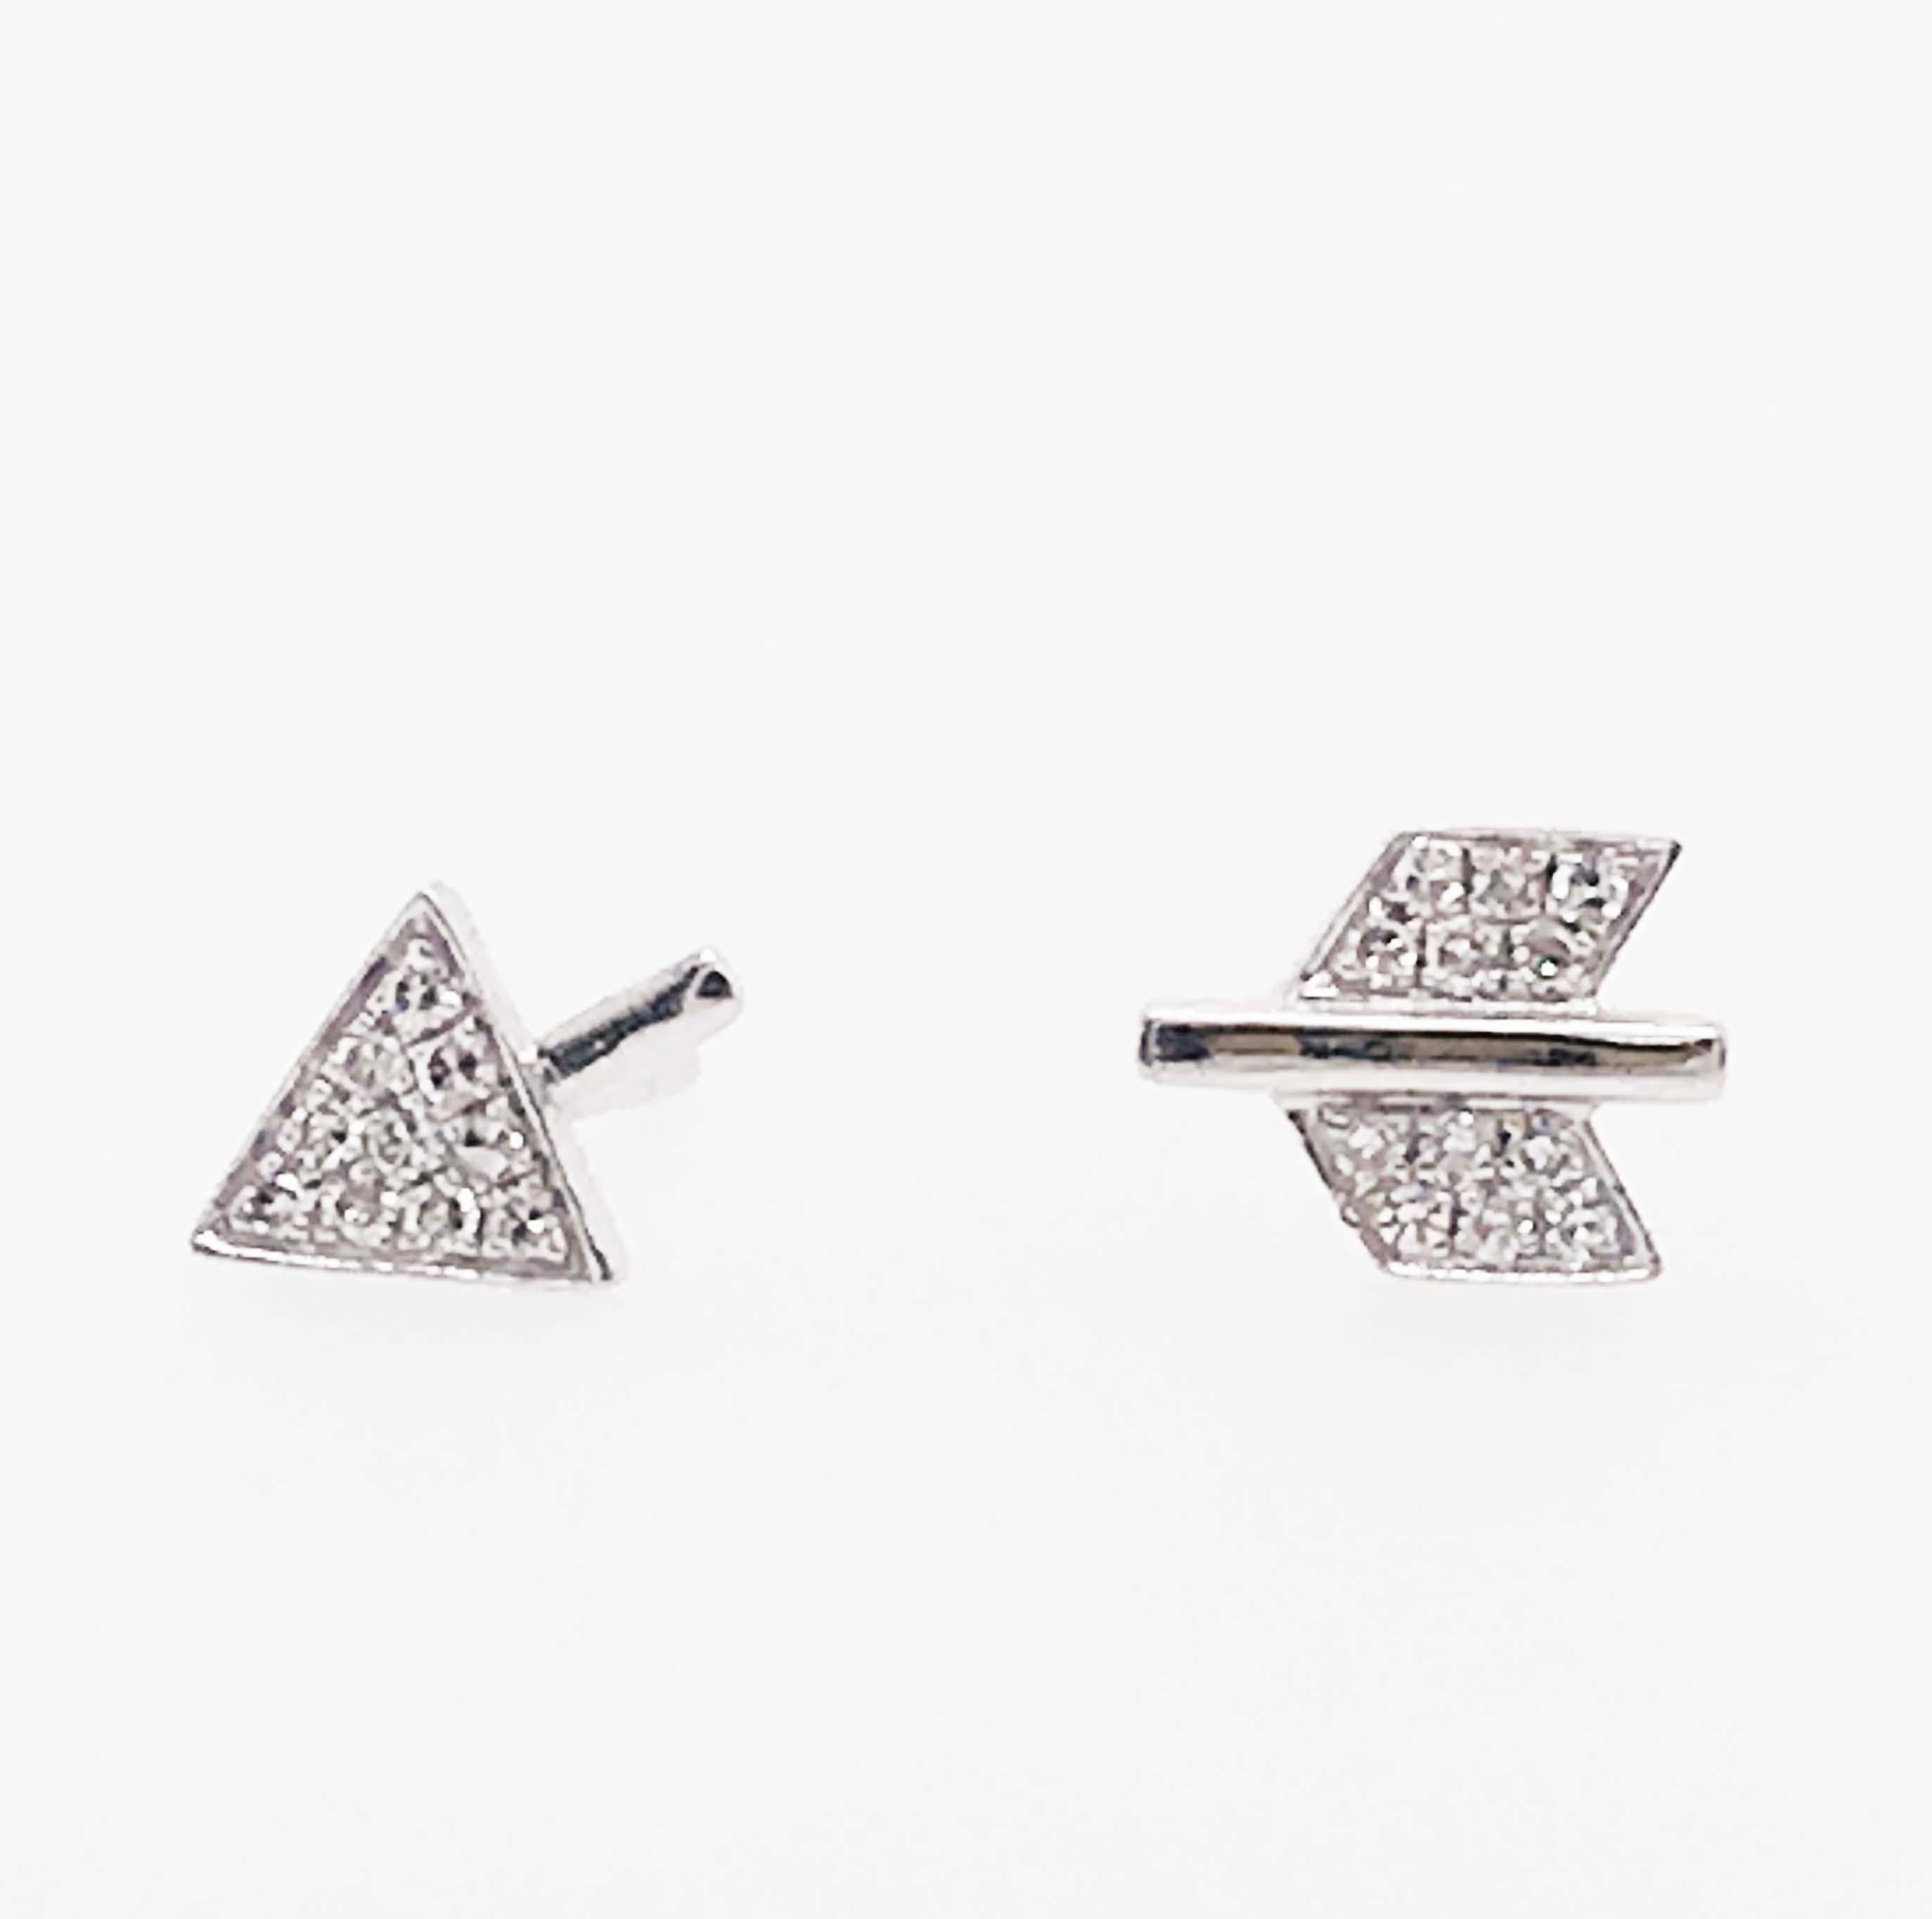 These fun diamond arrow earrings are trendy and adorable! The asymmetric diamond earrings have an innovative design that is very intriguing. The studs work together to create an arrow. One stud is the head of the arrow with a triangle shape that has